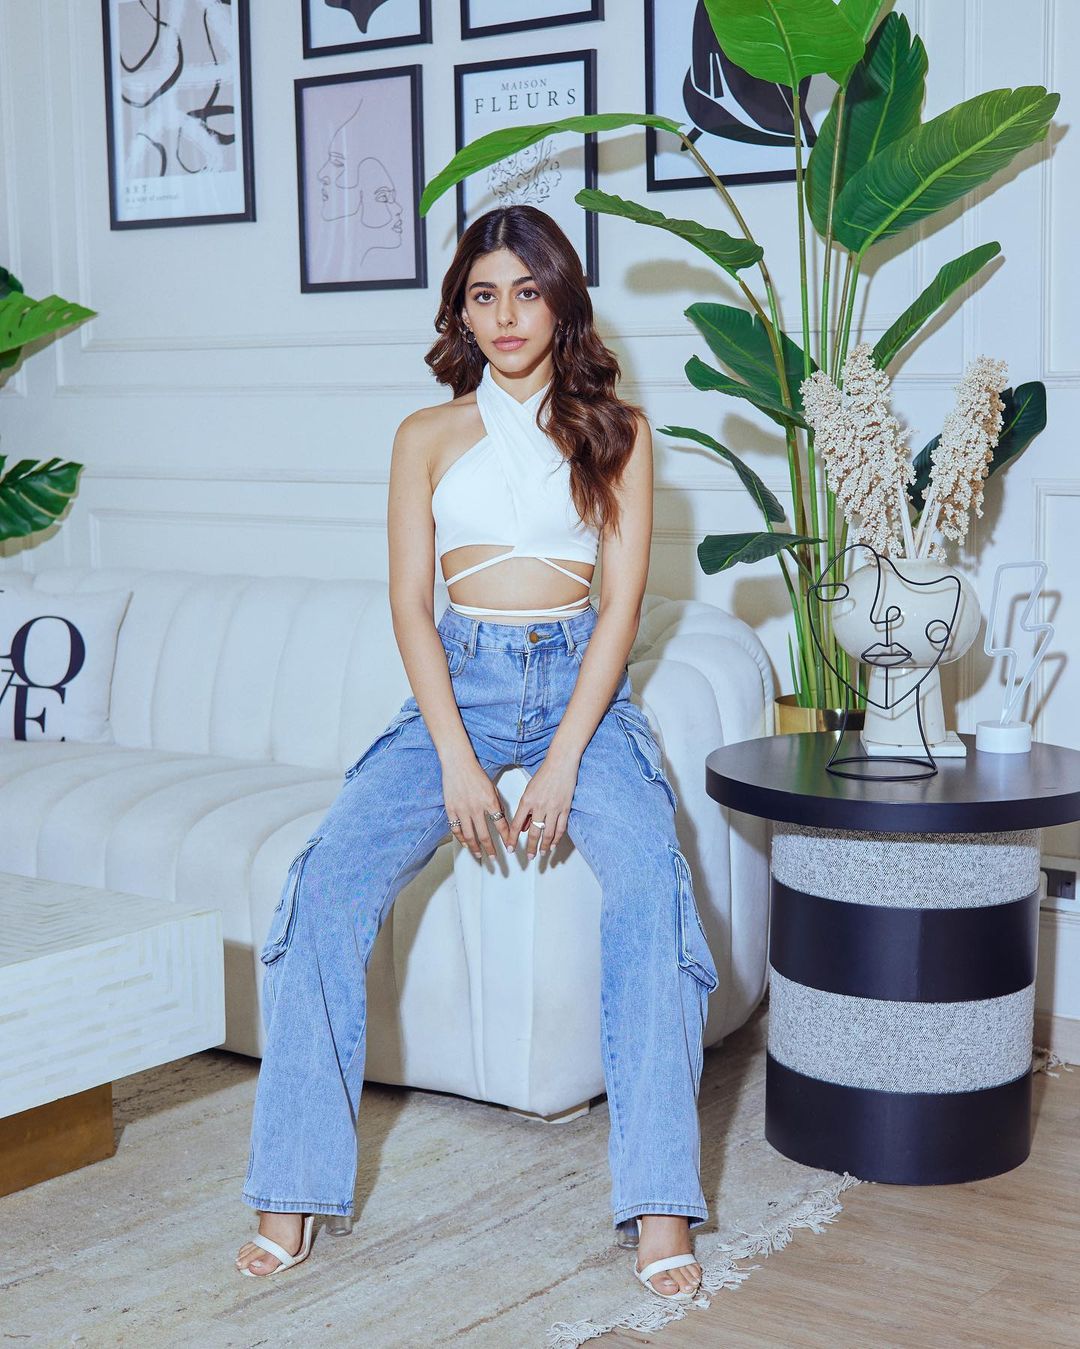 Alaya F Looks Unbelievably HOT in White Criss-Cross Top And Denim Pants